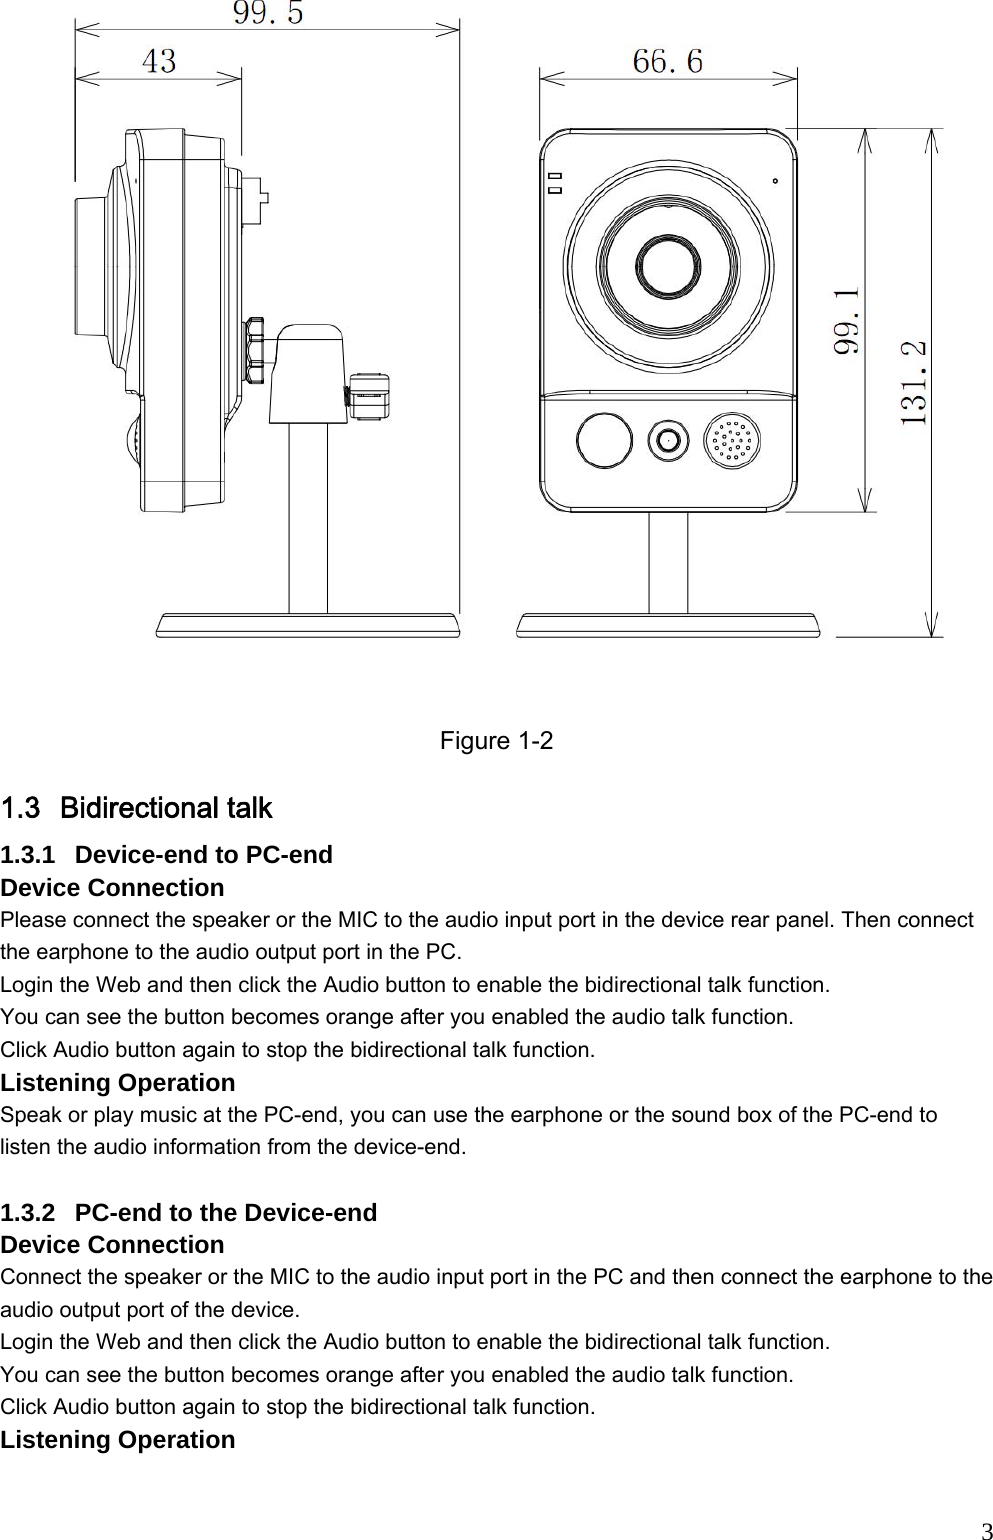                                                                              3 Figure 1-2 1.3 Bidirectional talk  1.3.1  Device-end to PC-end Device Connection  Please connect the speaker or the MIC to the audio input port in the device rear panel. Then connect the earphone to the audio output port in the PC. Login the Web and then click the Audio button to enable the bidirectional talk function.  You can see the button becomes orange after you enabled the audio talk function.  Click Audio button again to stop the bidirectional talk function.  Listening Operation Speak or play music at the PC-end, you can use the earphone or the sound box of the PC-end to listen the audio information from the device-end.   1.3.2  PC-end to the Device-end Device Connection  Connect the speaker or the MIC to the audio input port in the PC and then connect the earphone to the audio output port of the device. Login the Web and then click the Audio button to enable the bidirectional talk function.  You can see the button becomes orange after you enabled the audio talk function.  Click Audio button again to stop the bidirectional talk function.   Listening Operation 